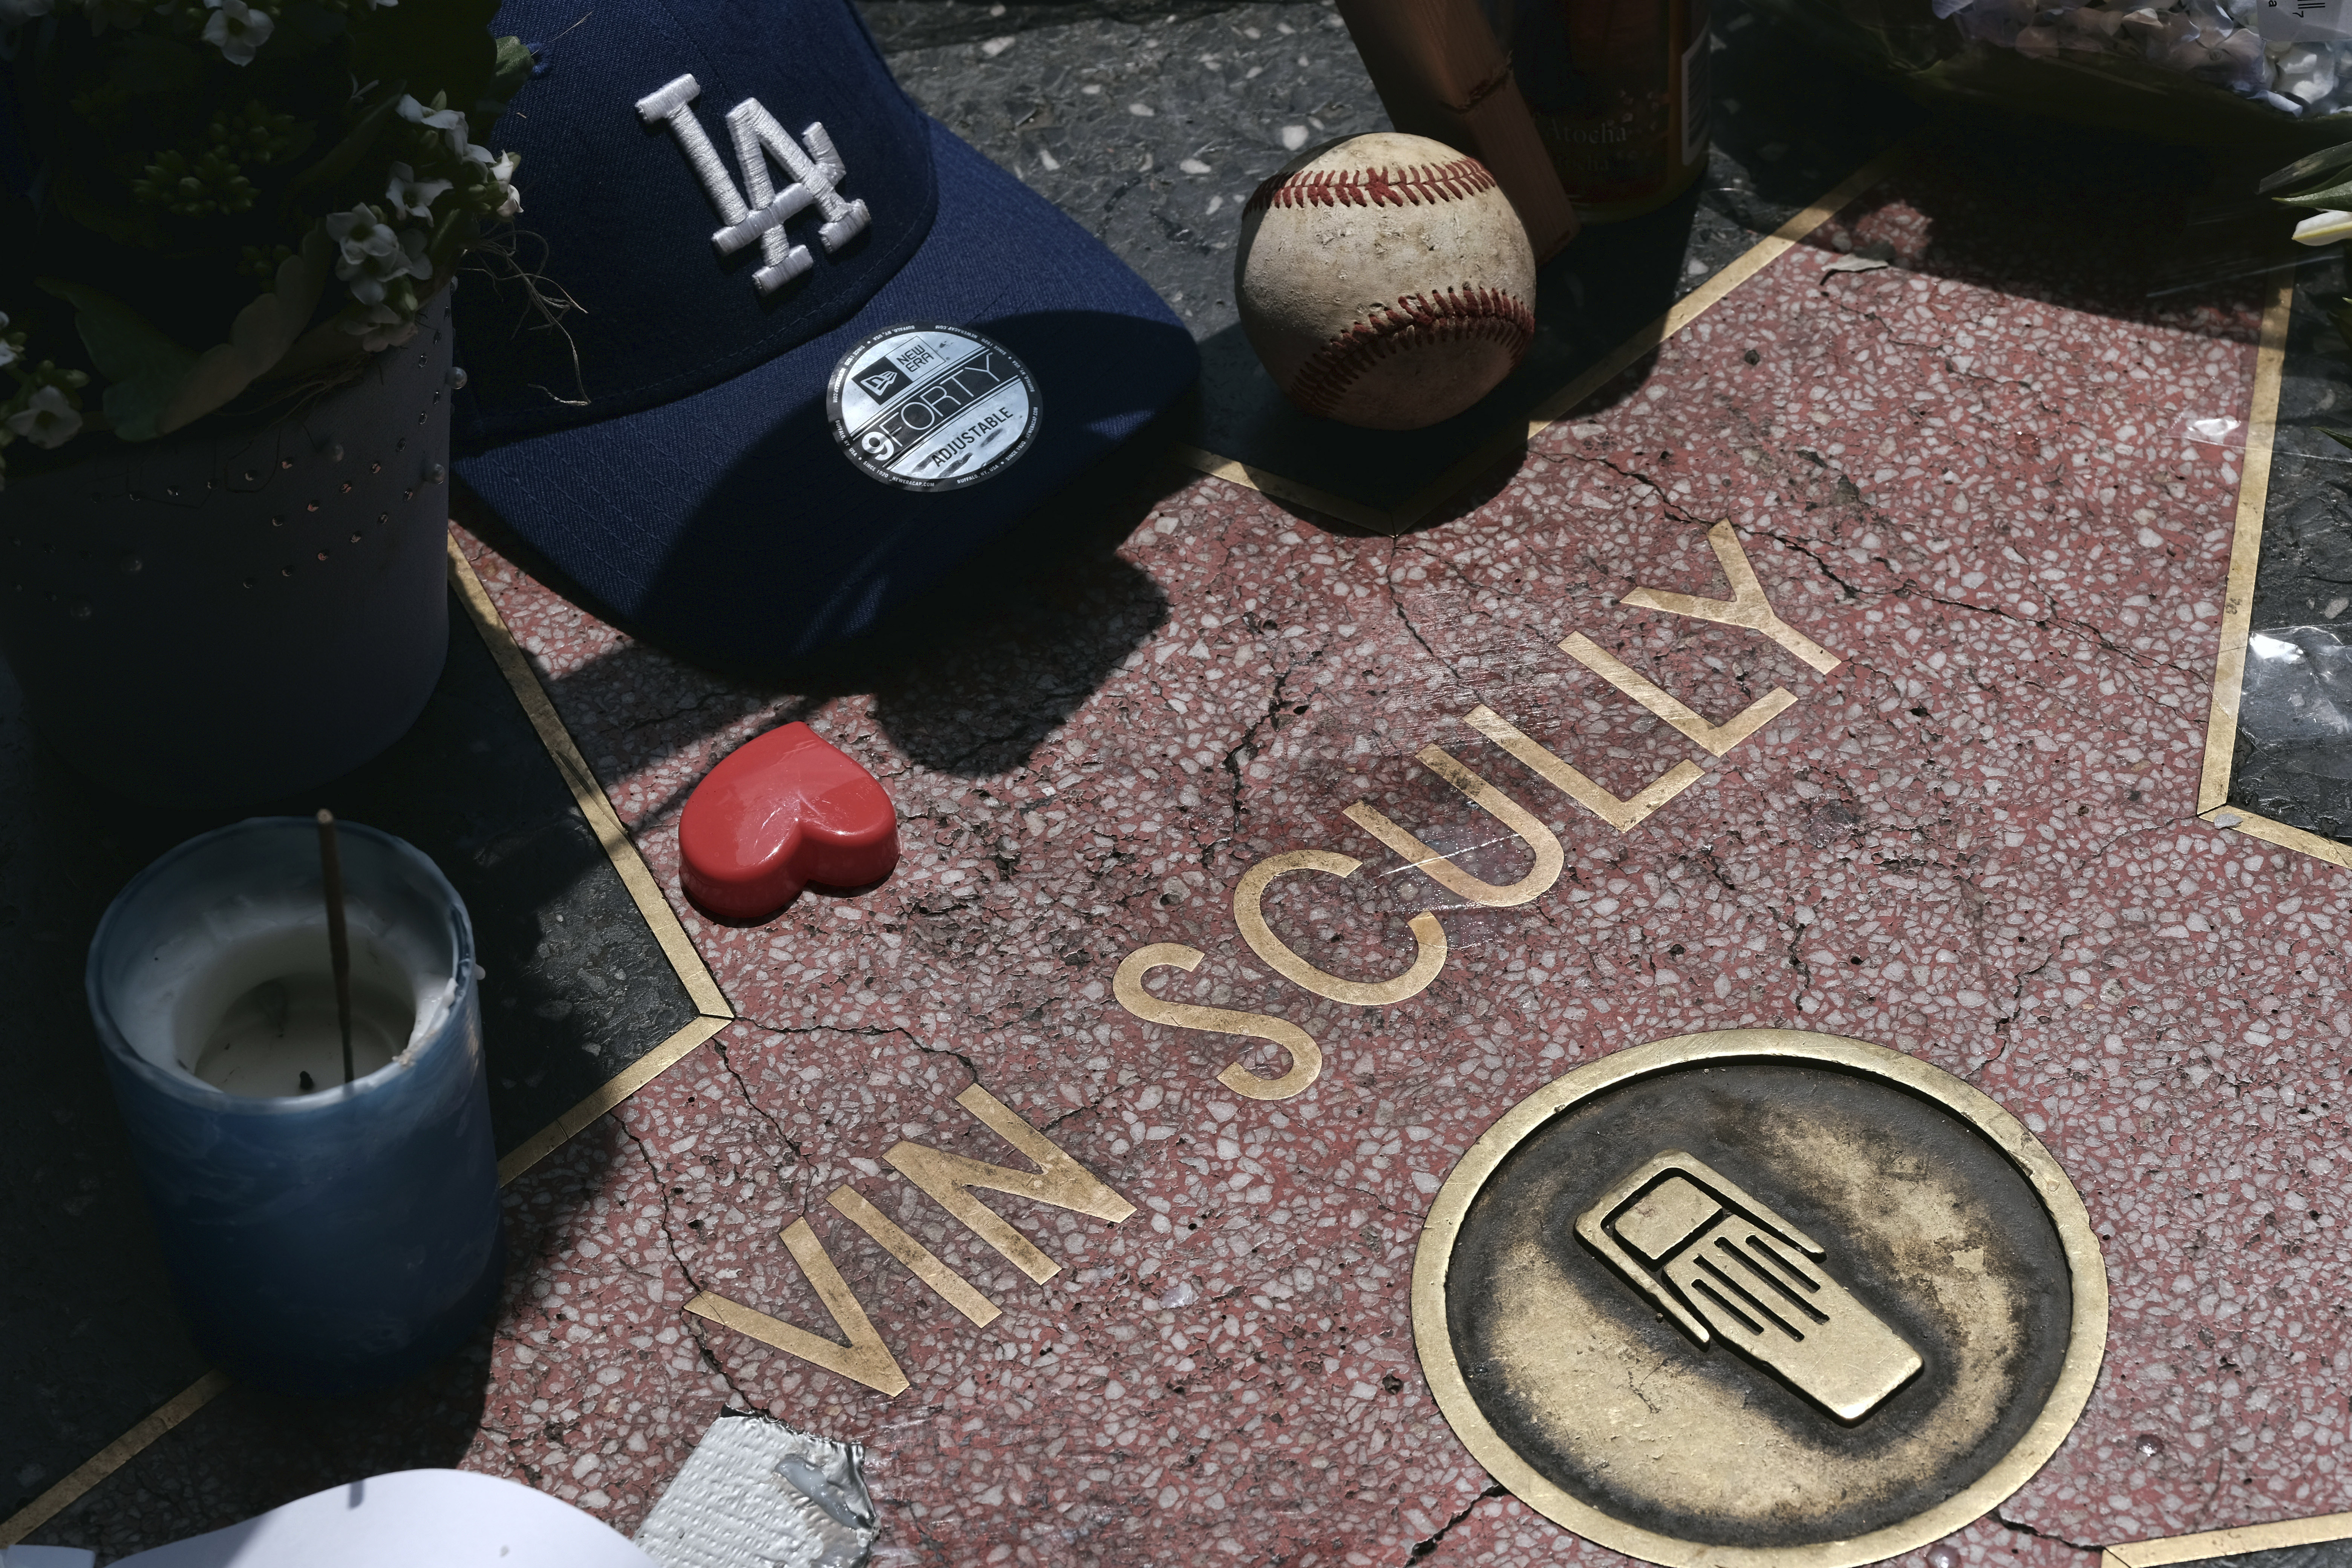 Vin Scully Dead: The Voice Of The L.A. Dodgers, And Their City